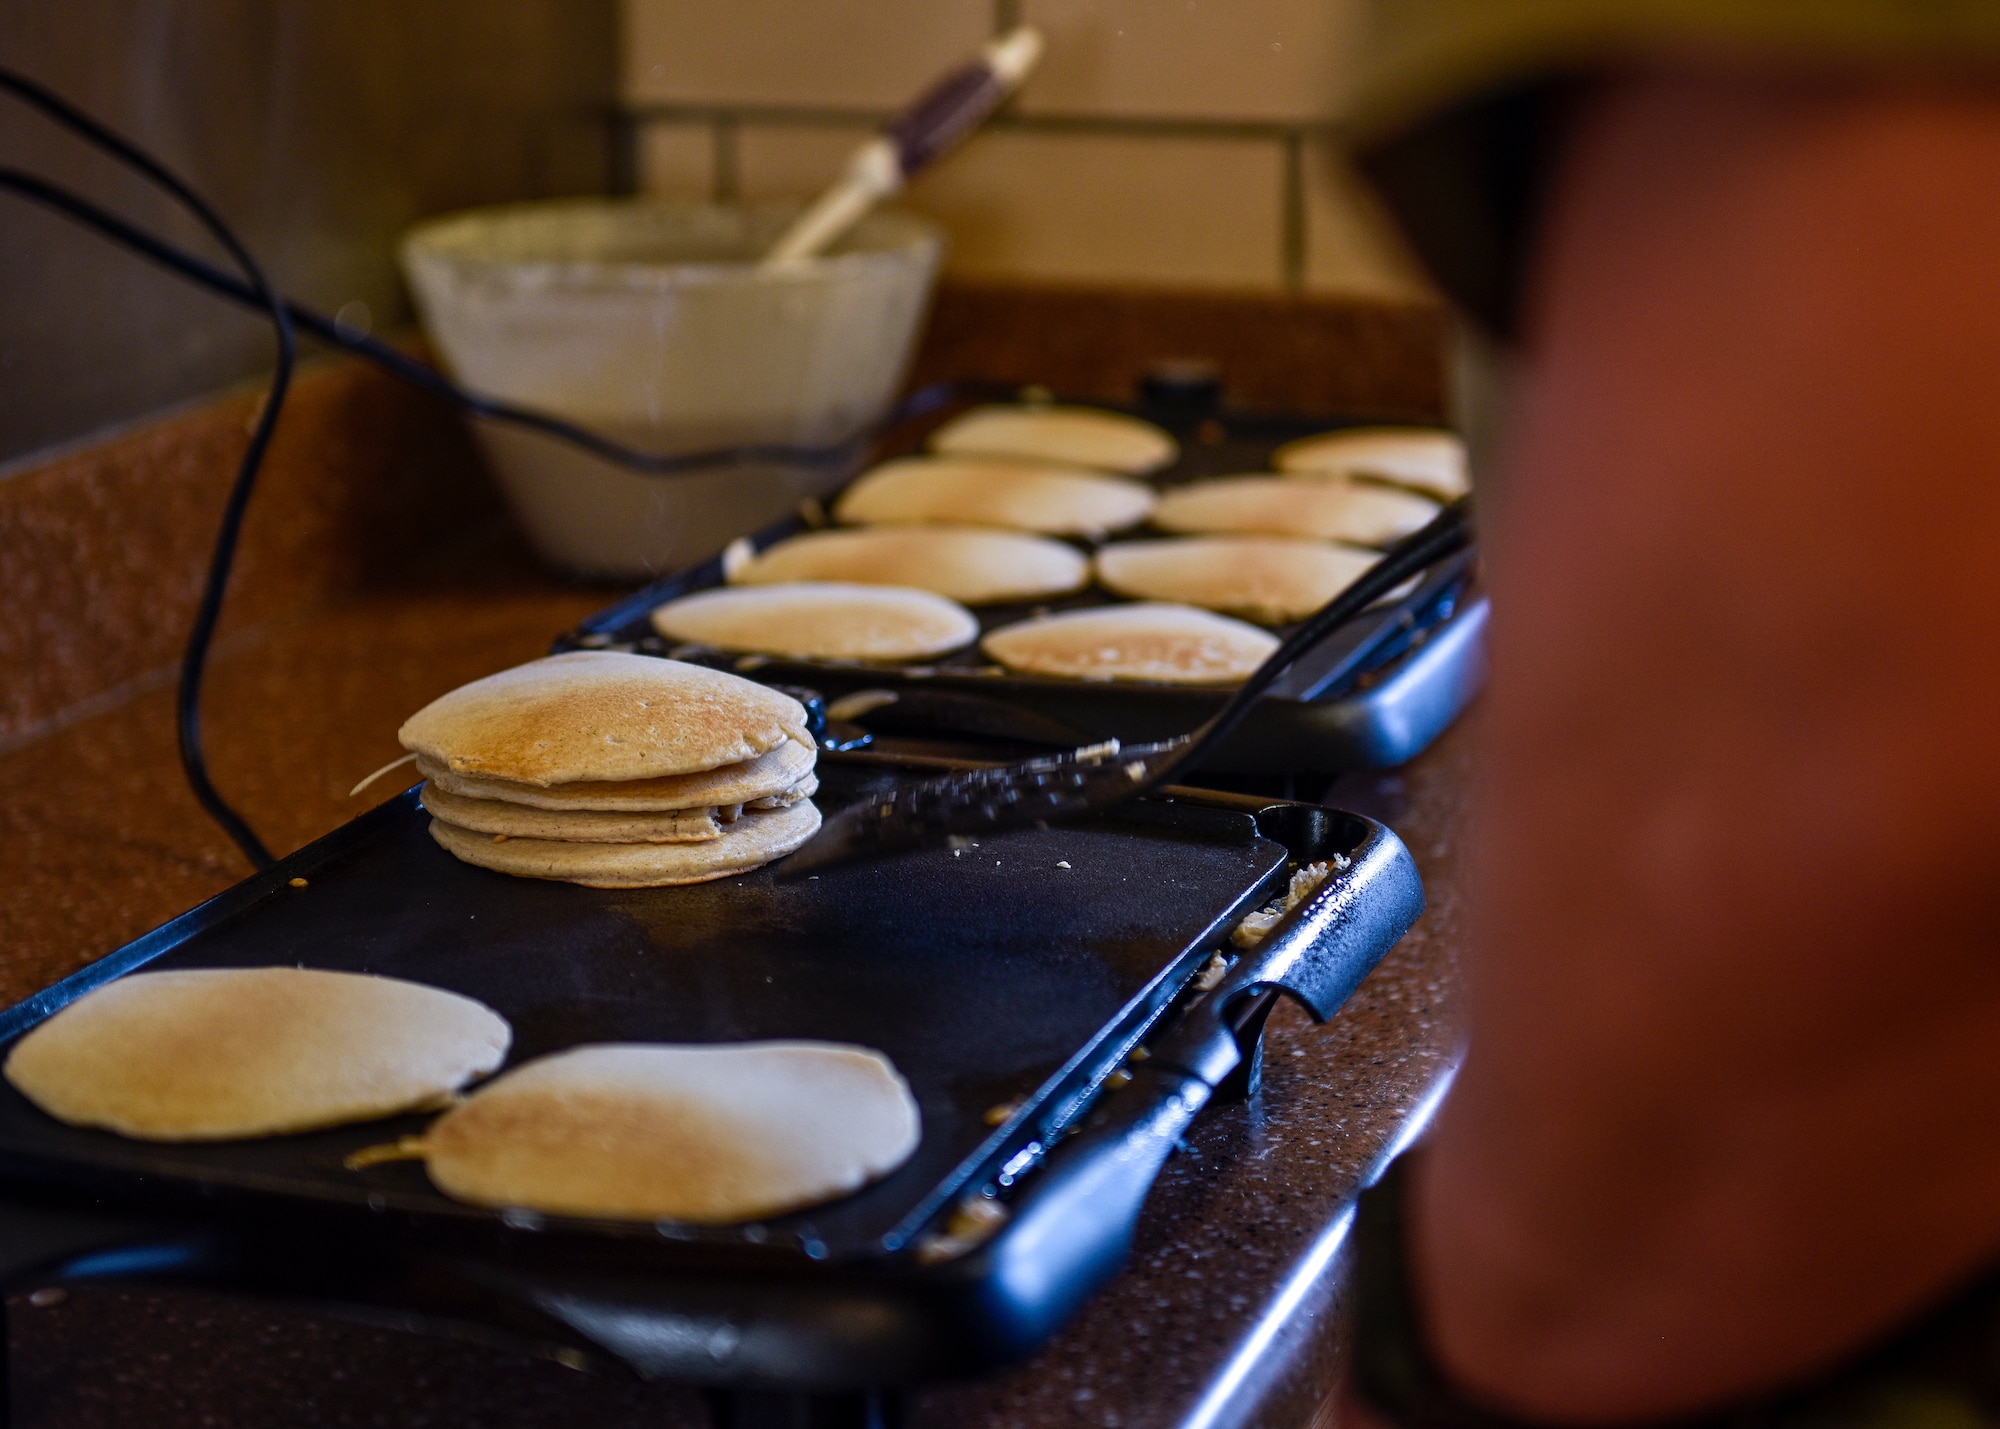 U.S. Air Force Col. David Carlson, 377th Maintenance Group commander, cooks pancakes at Kirtland Air Force Base, Oct. 7, 2019. The Combined Federal Campaign fundraising goal for 2019 at Kirtland AFB is $126,000. (U.S. Air Force photo by Airman 1st Class Austin J. Prisbrey)